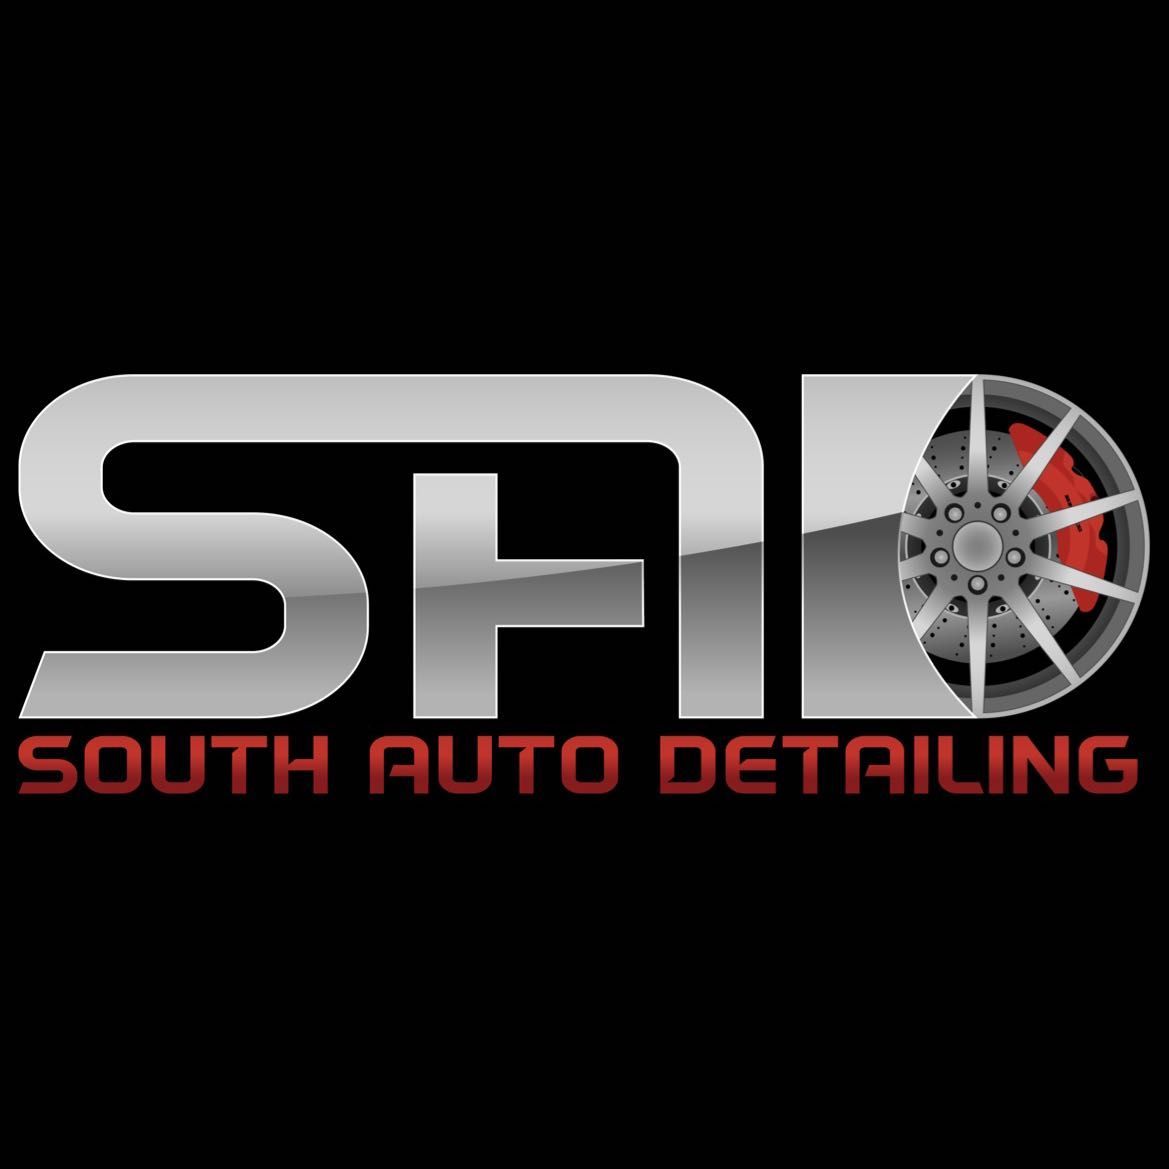 South Auto Detailing, 5824 Kevin Dr, Metairie, 70003